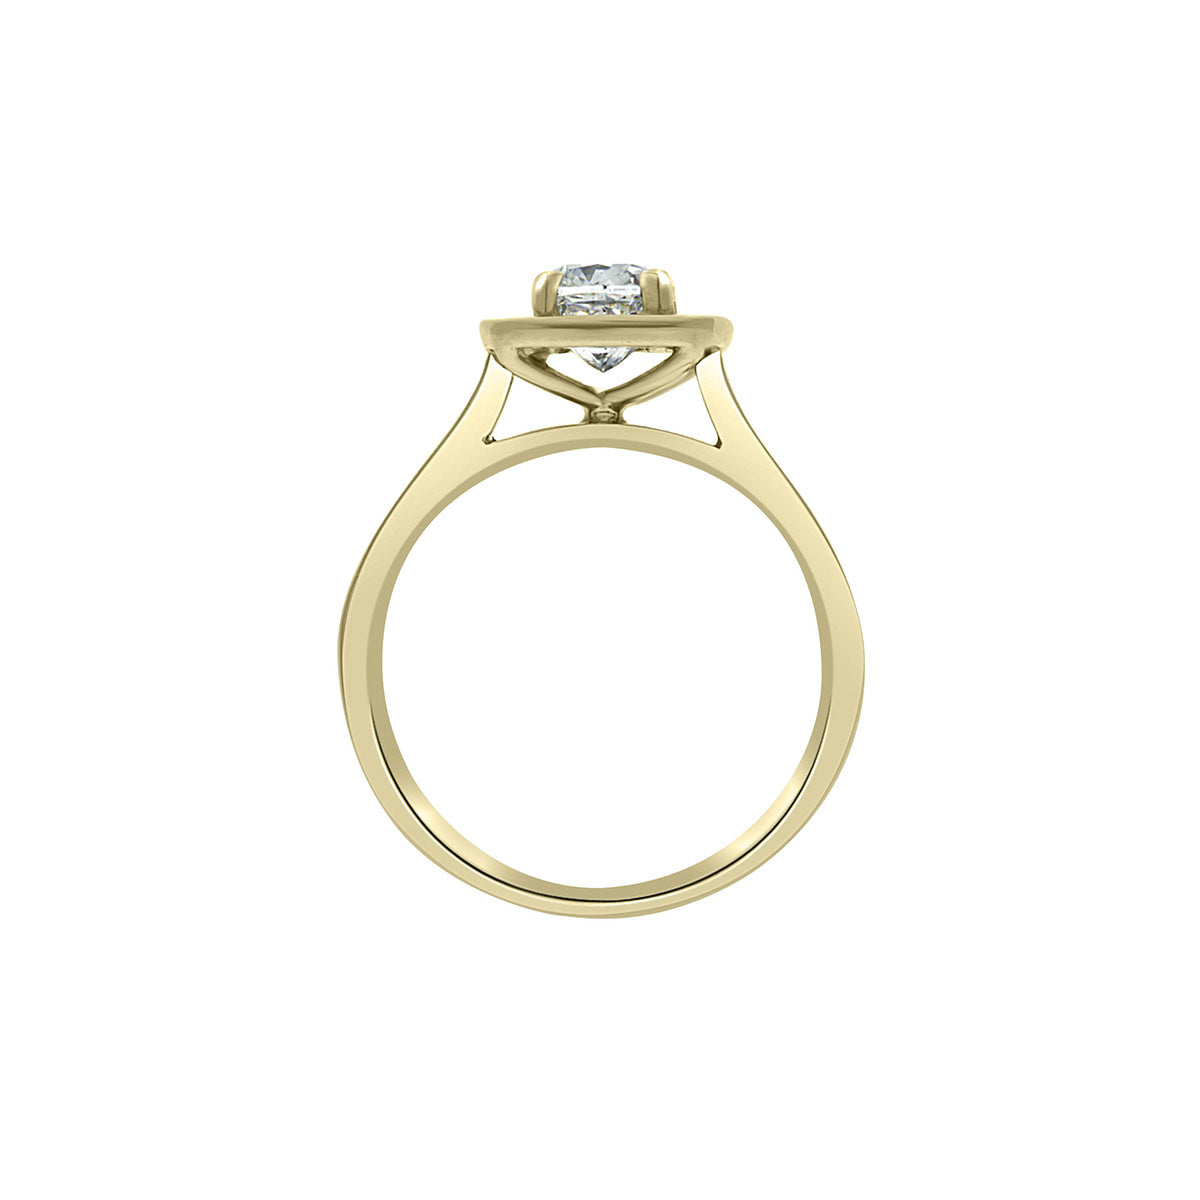 Cushion Cut Diamond Ring in yellow gold in a vertical position